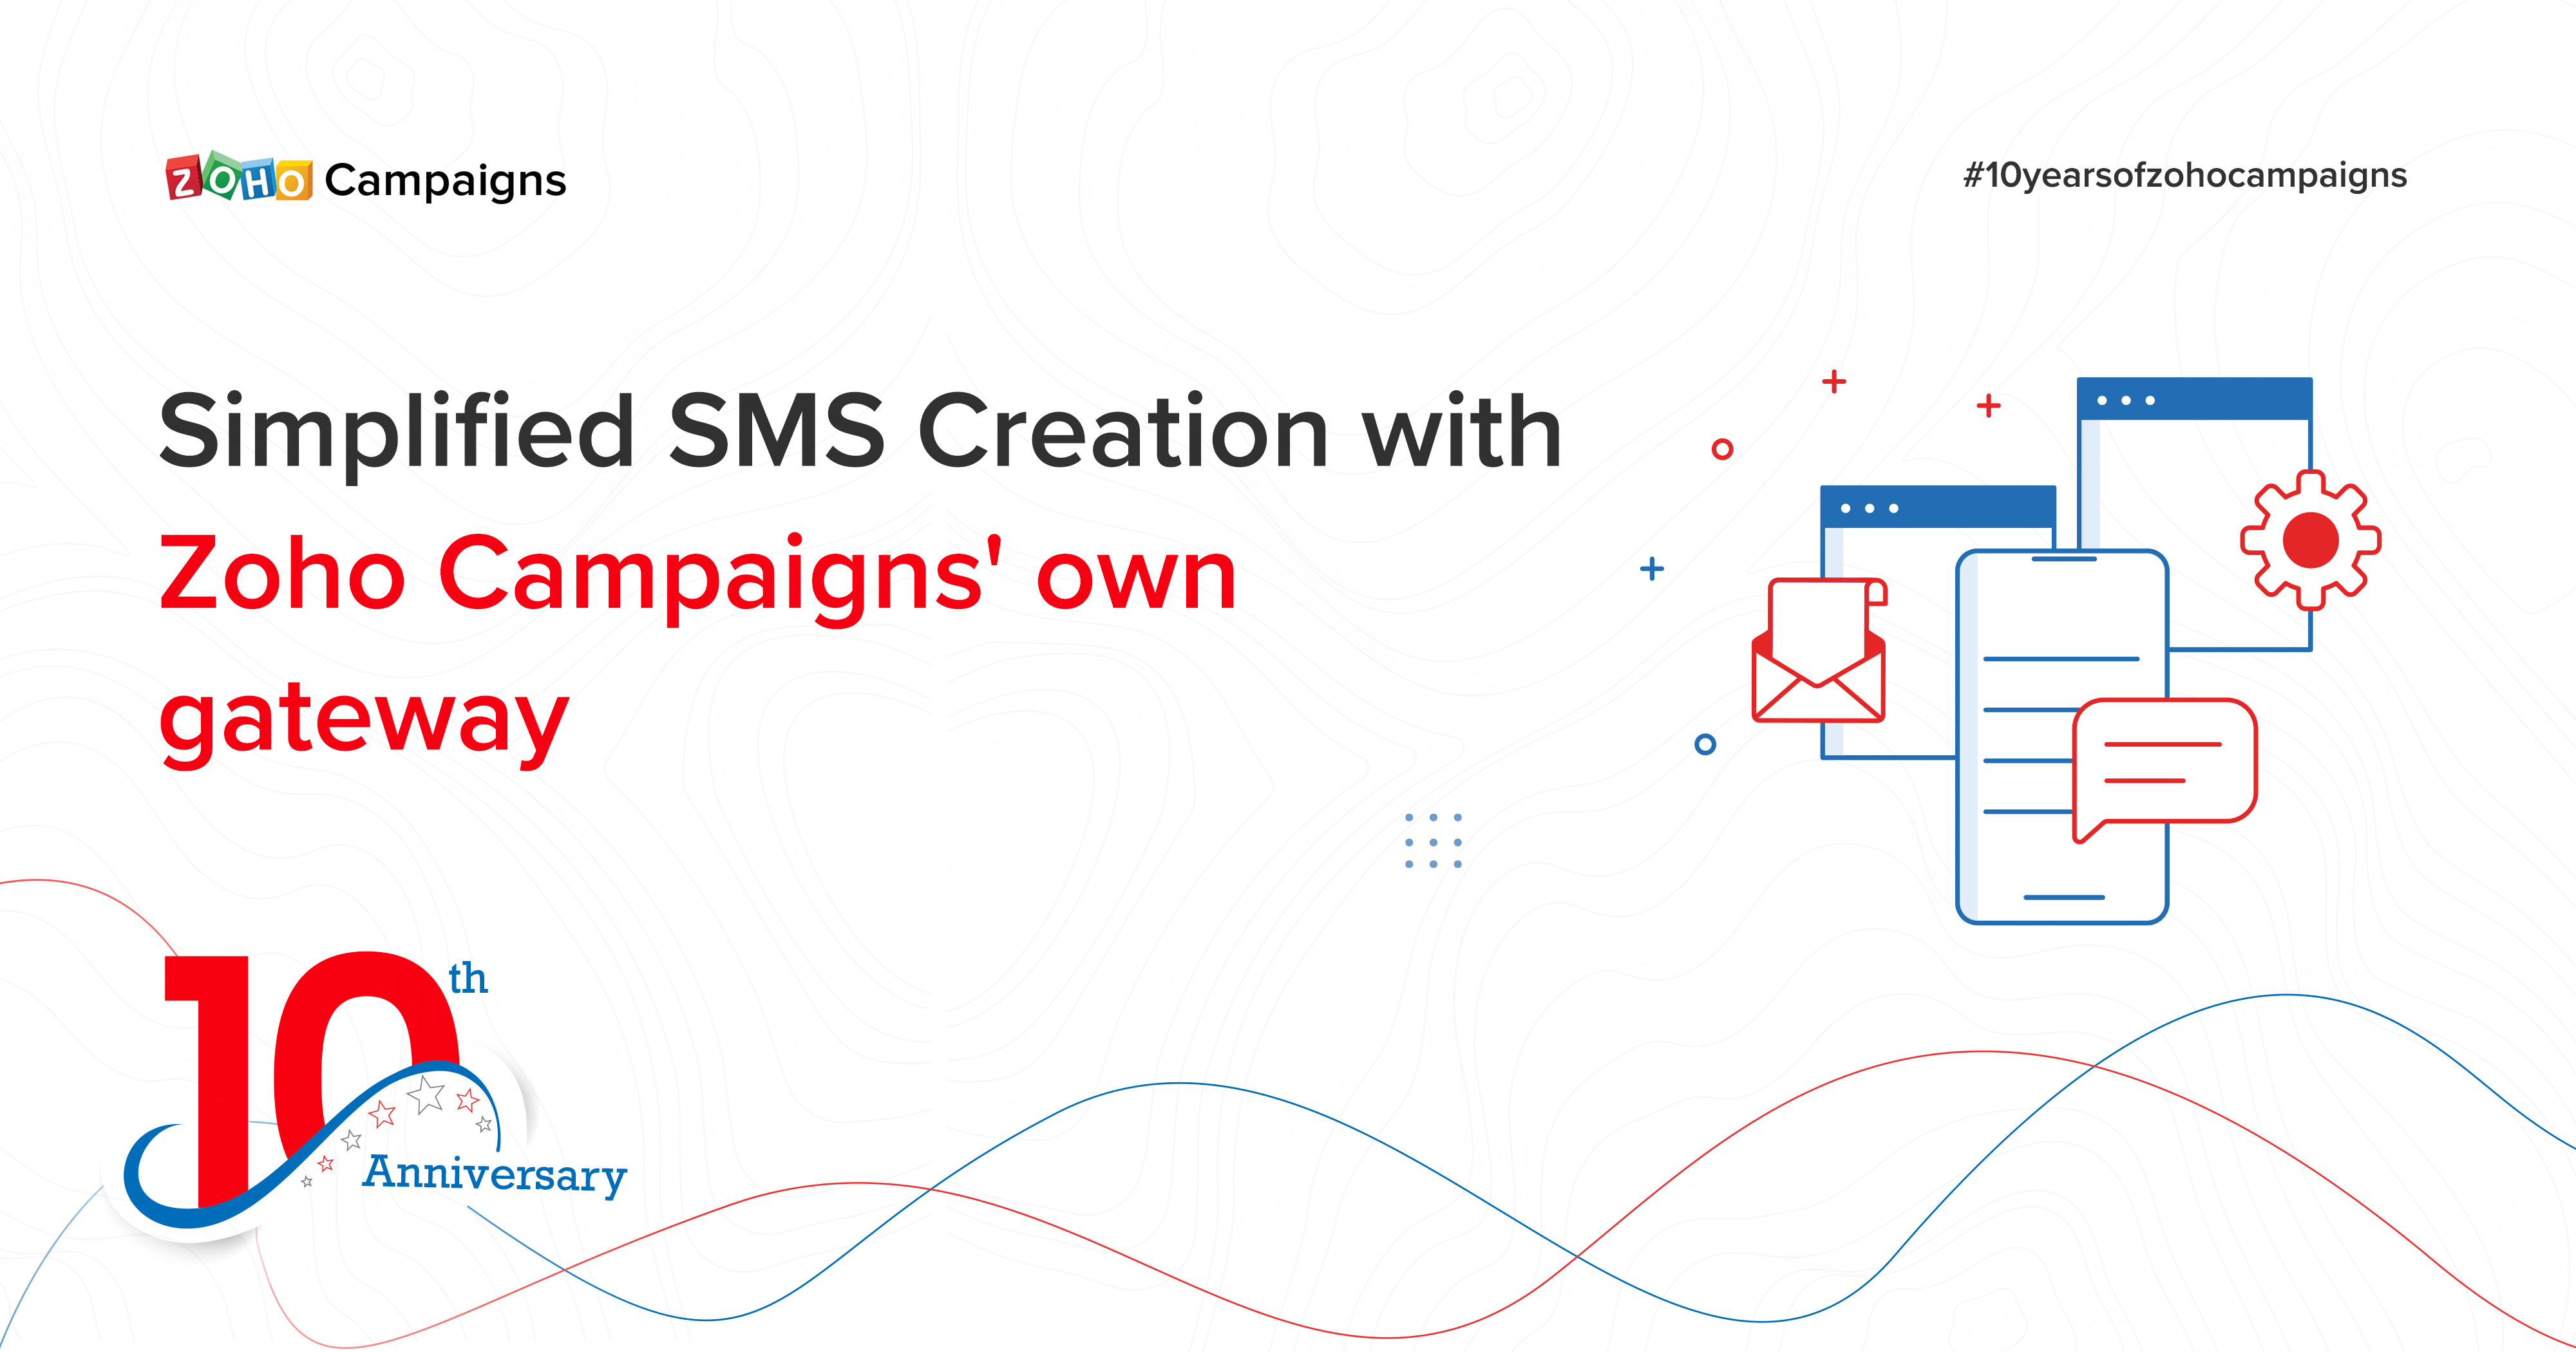 Introducing Zoho Campaigns' SMS gateway